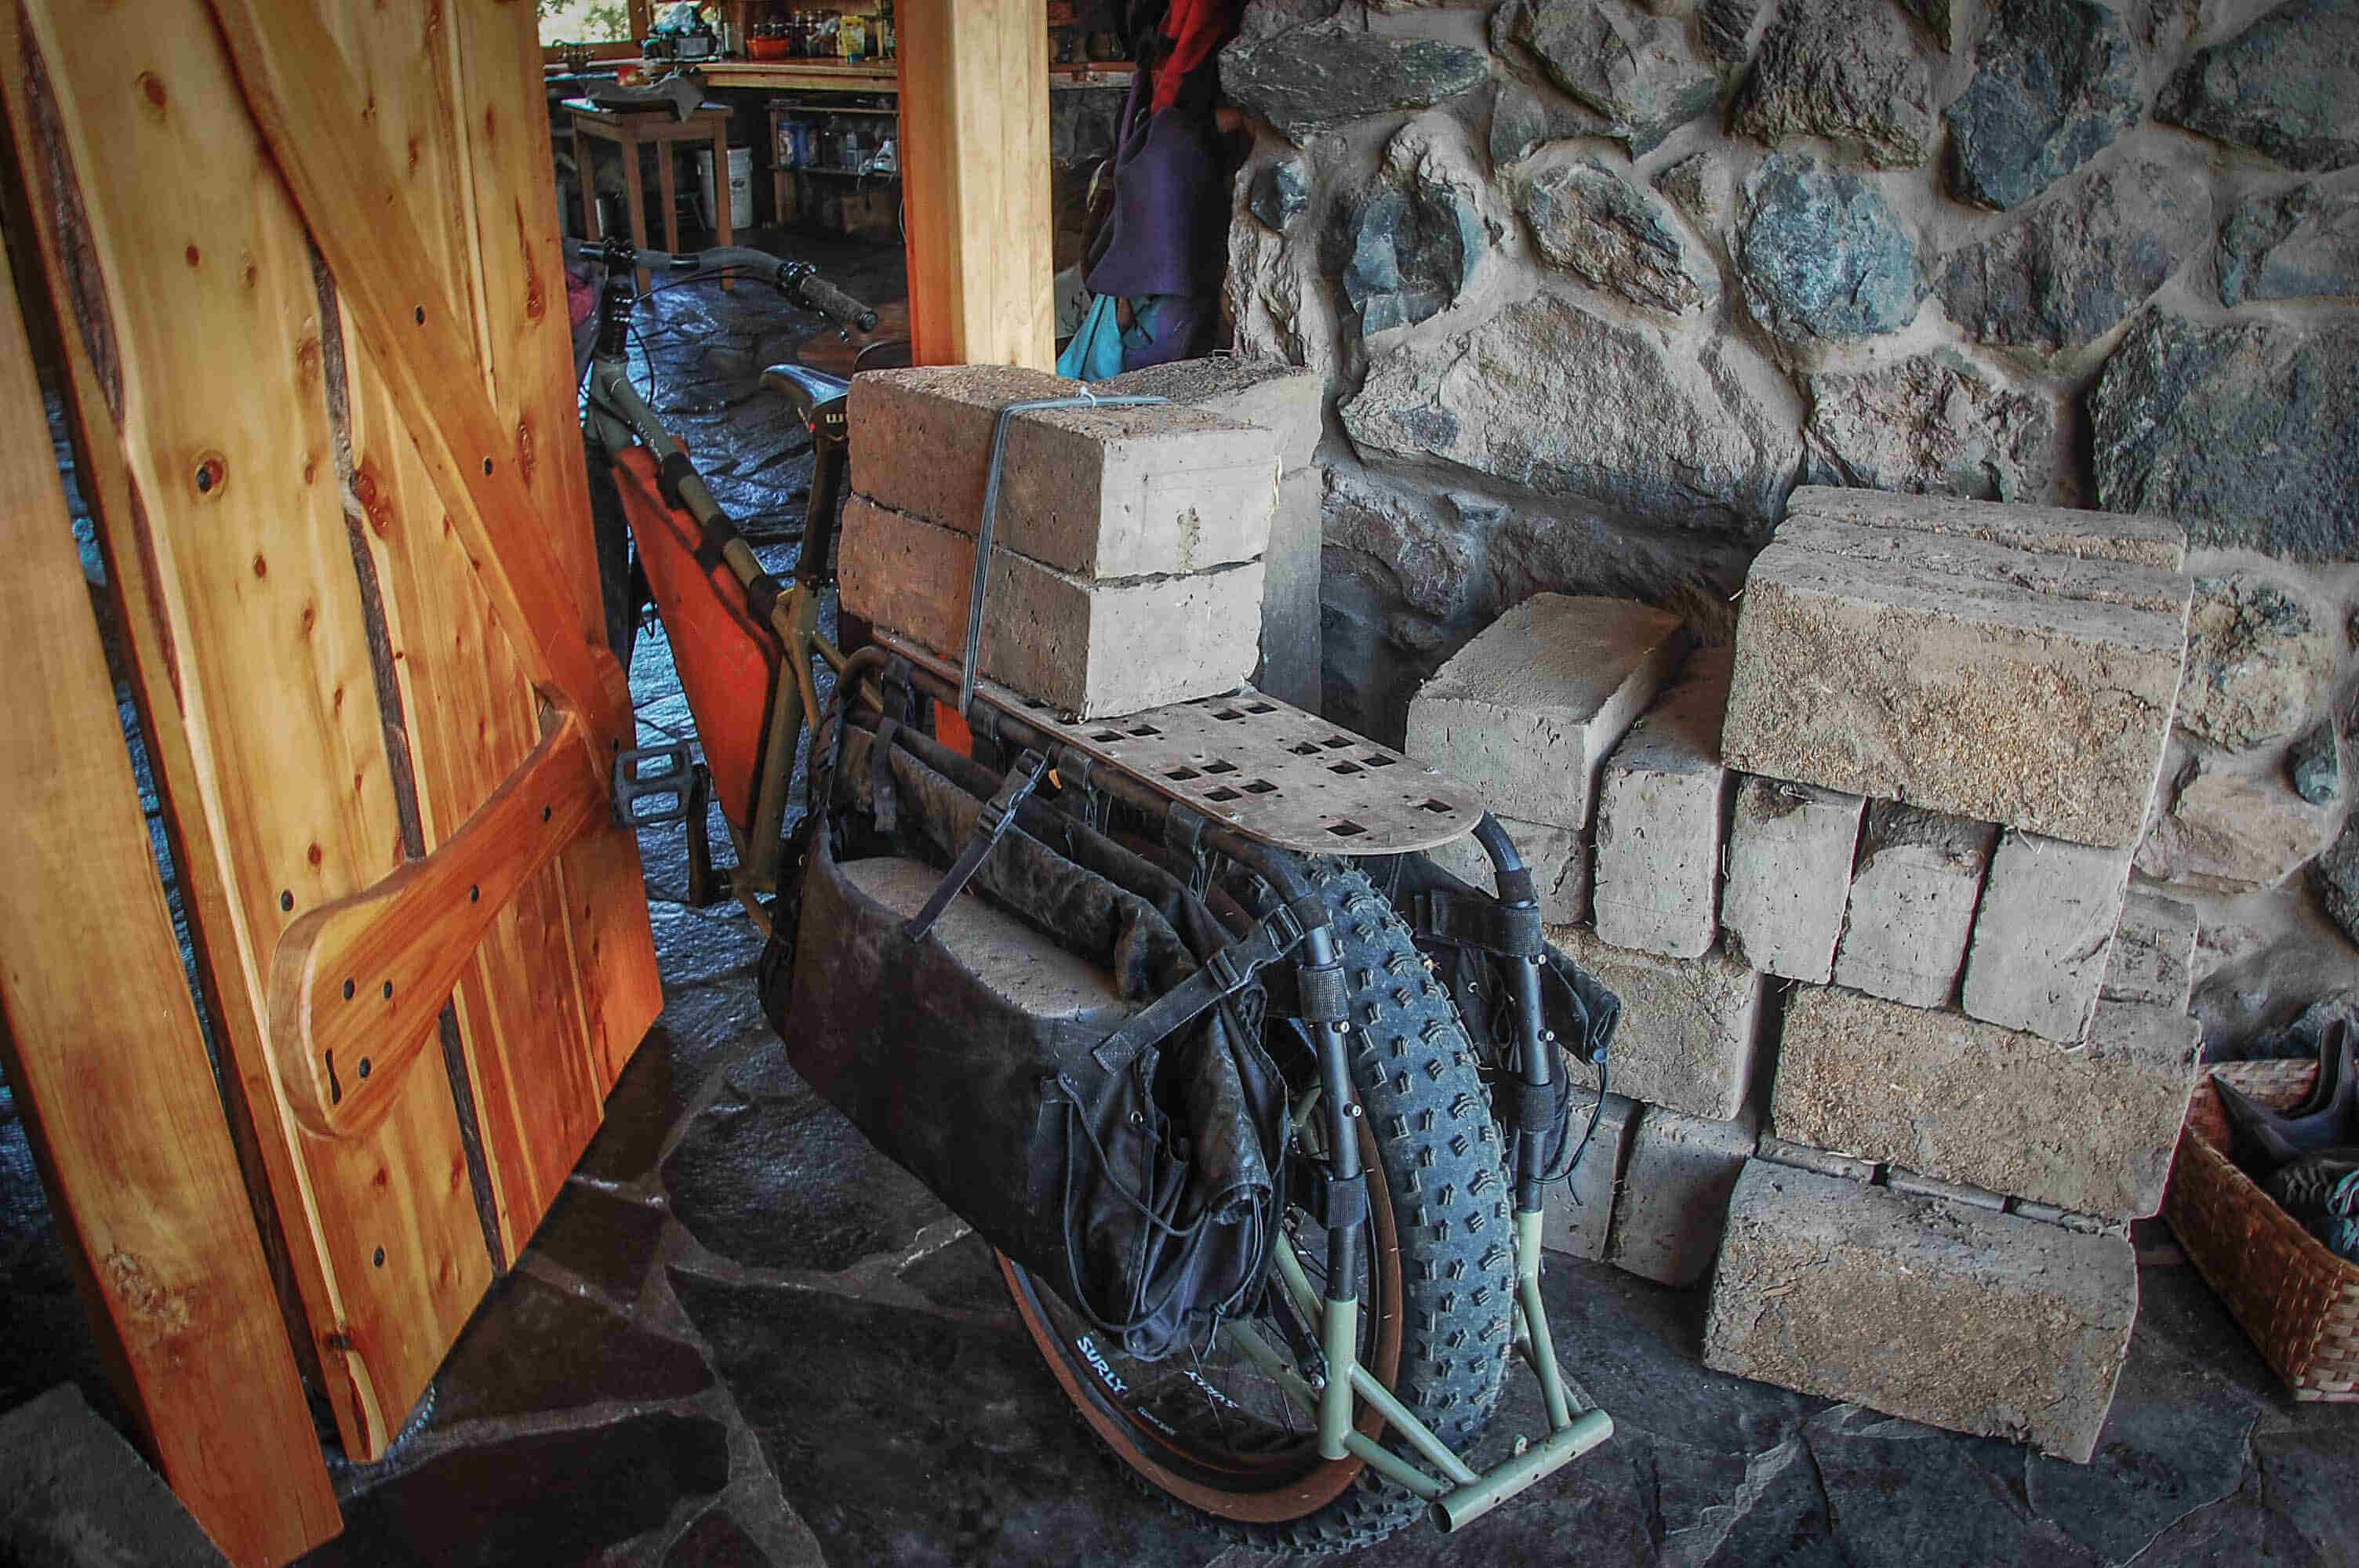 Left rear view of a Surly Big Fat Dummy bike with cement blocks on the rear rack, in the doorway of a stone building